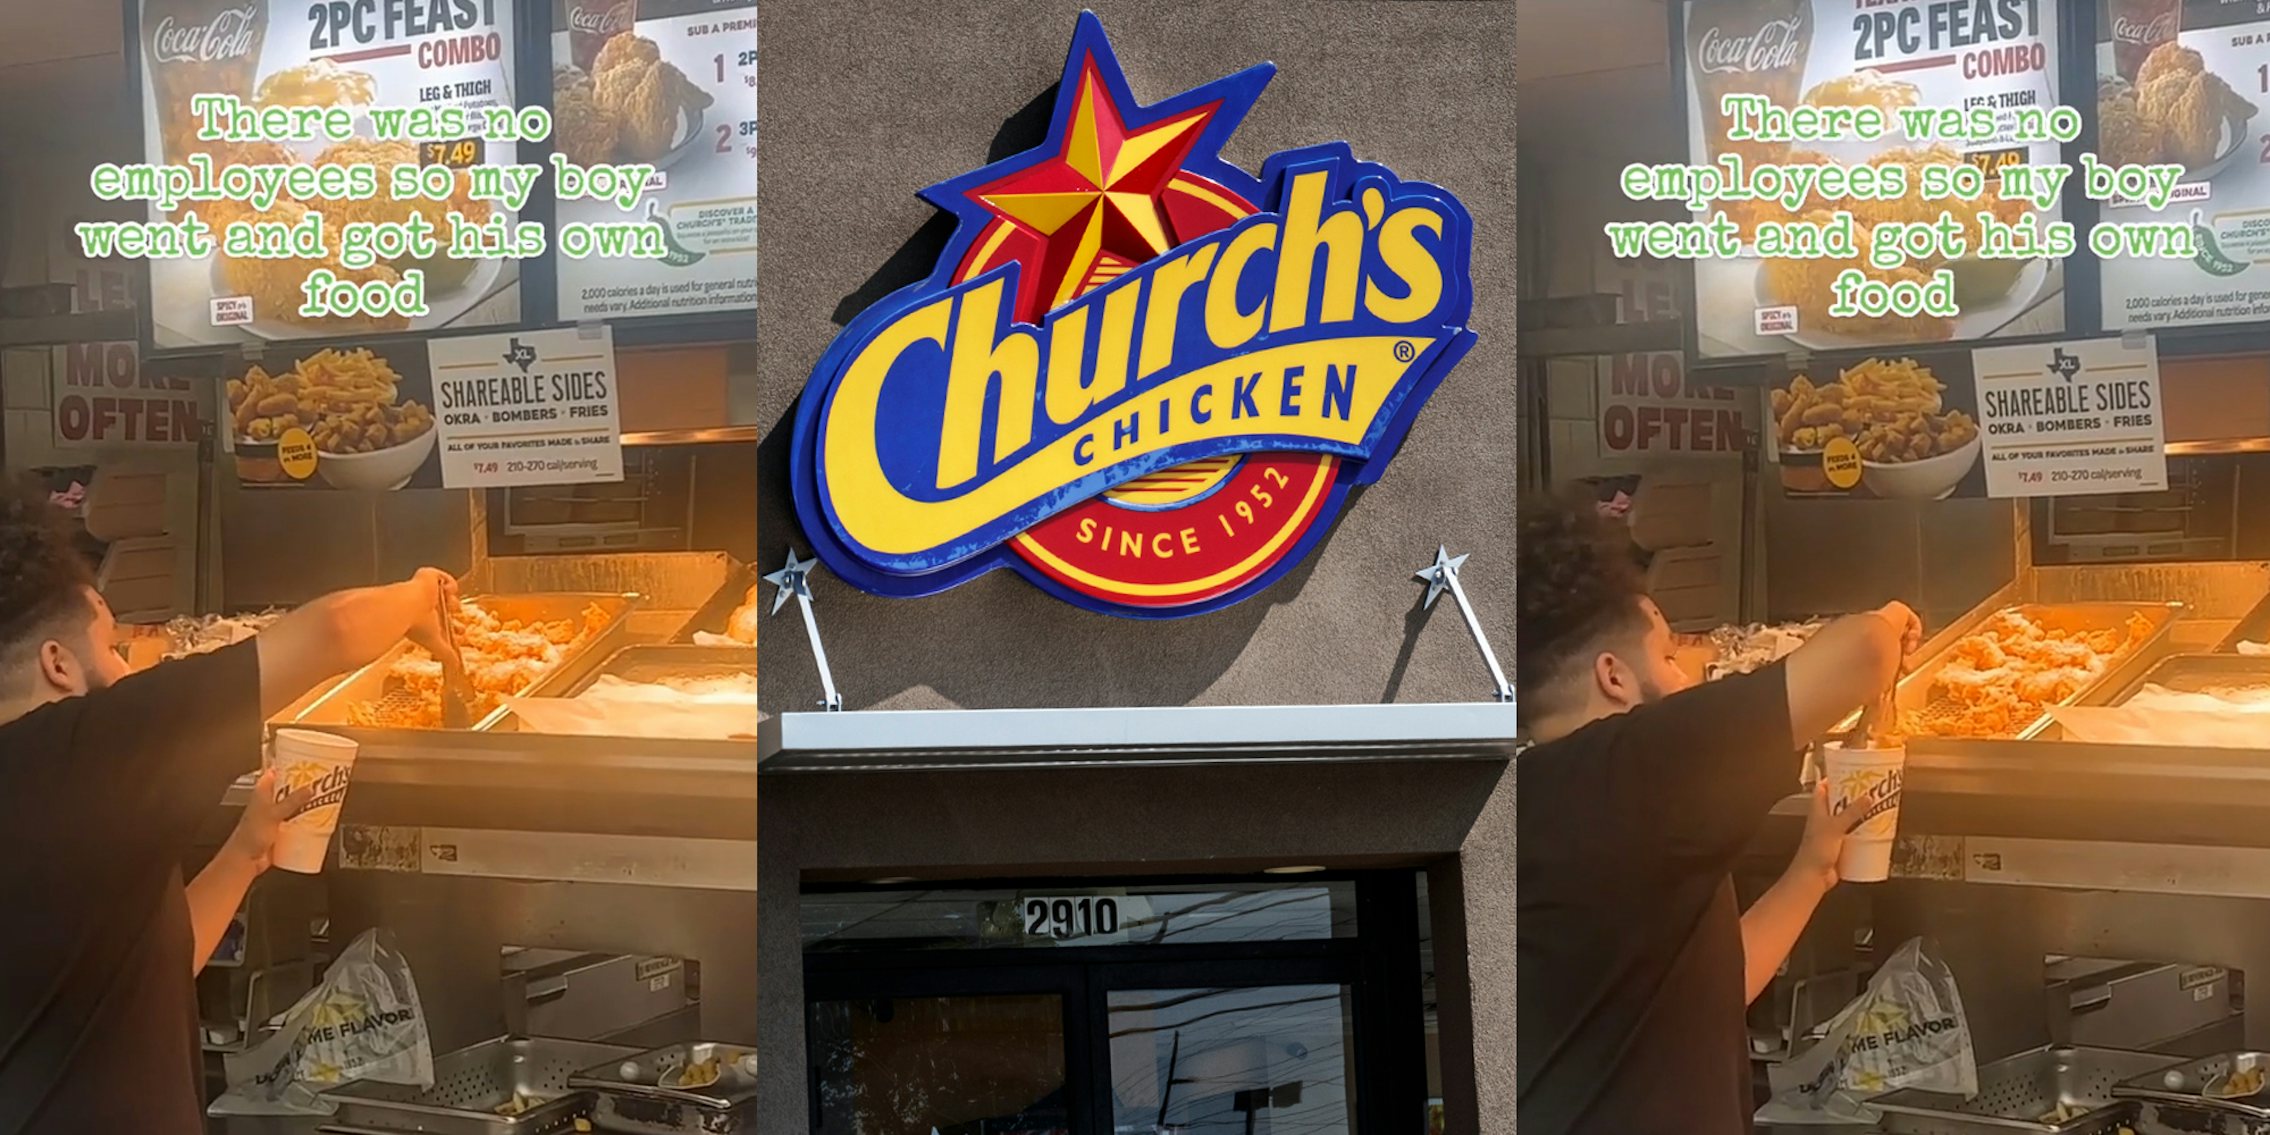 Church's Chicken customer getting their own food with caption 'There was no employees so my boy went and got his own food' (l) Church's Chicken sign above entrance (c) Church's Chicken customer getting their own food with caption 'There was no employees so my boy went and got his own food' (r)